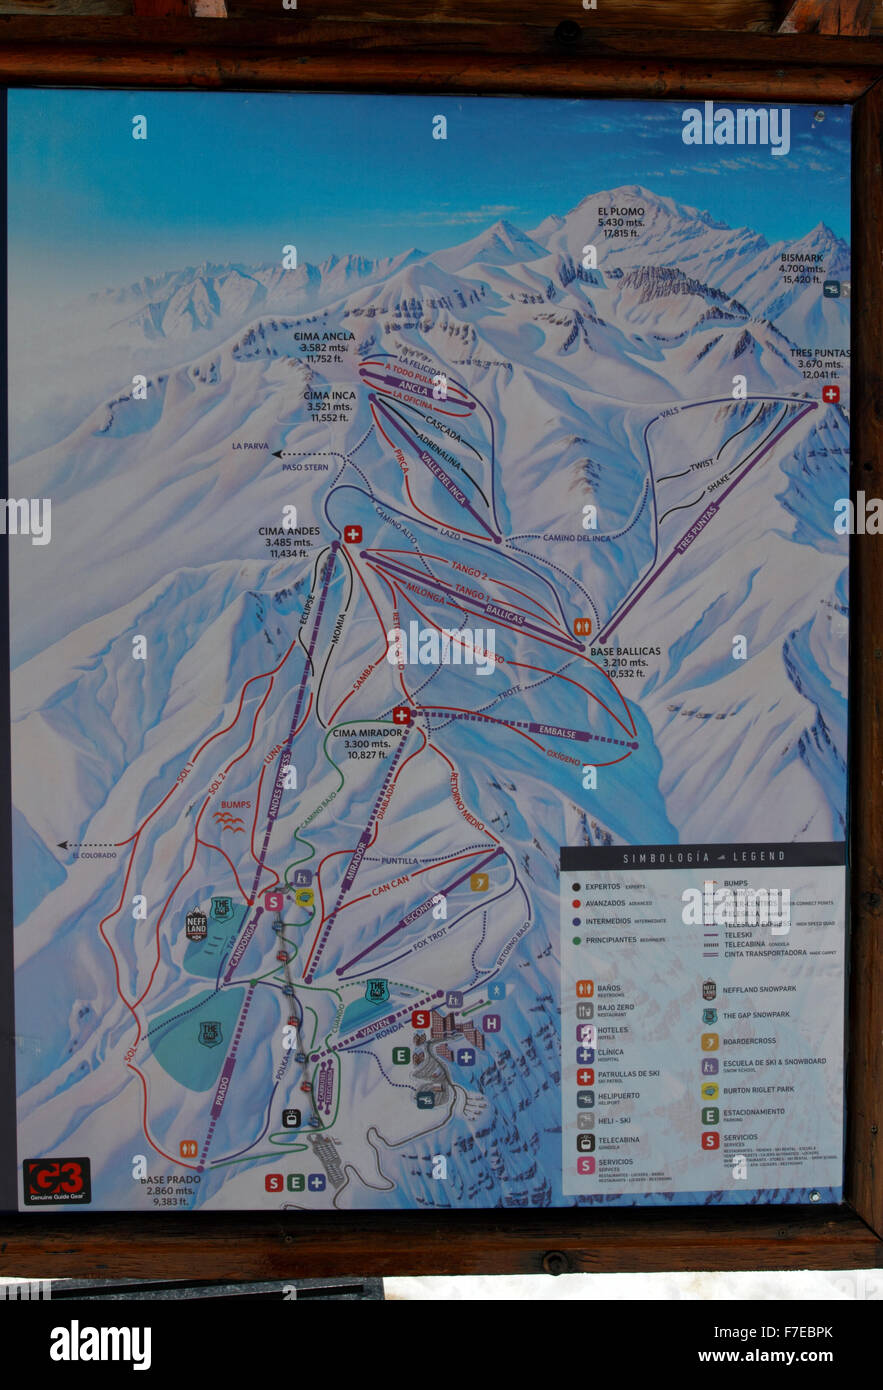 Map of Valle Nevado ski routes and passes, Andes, Chile. Stock Photo